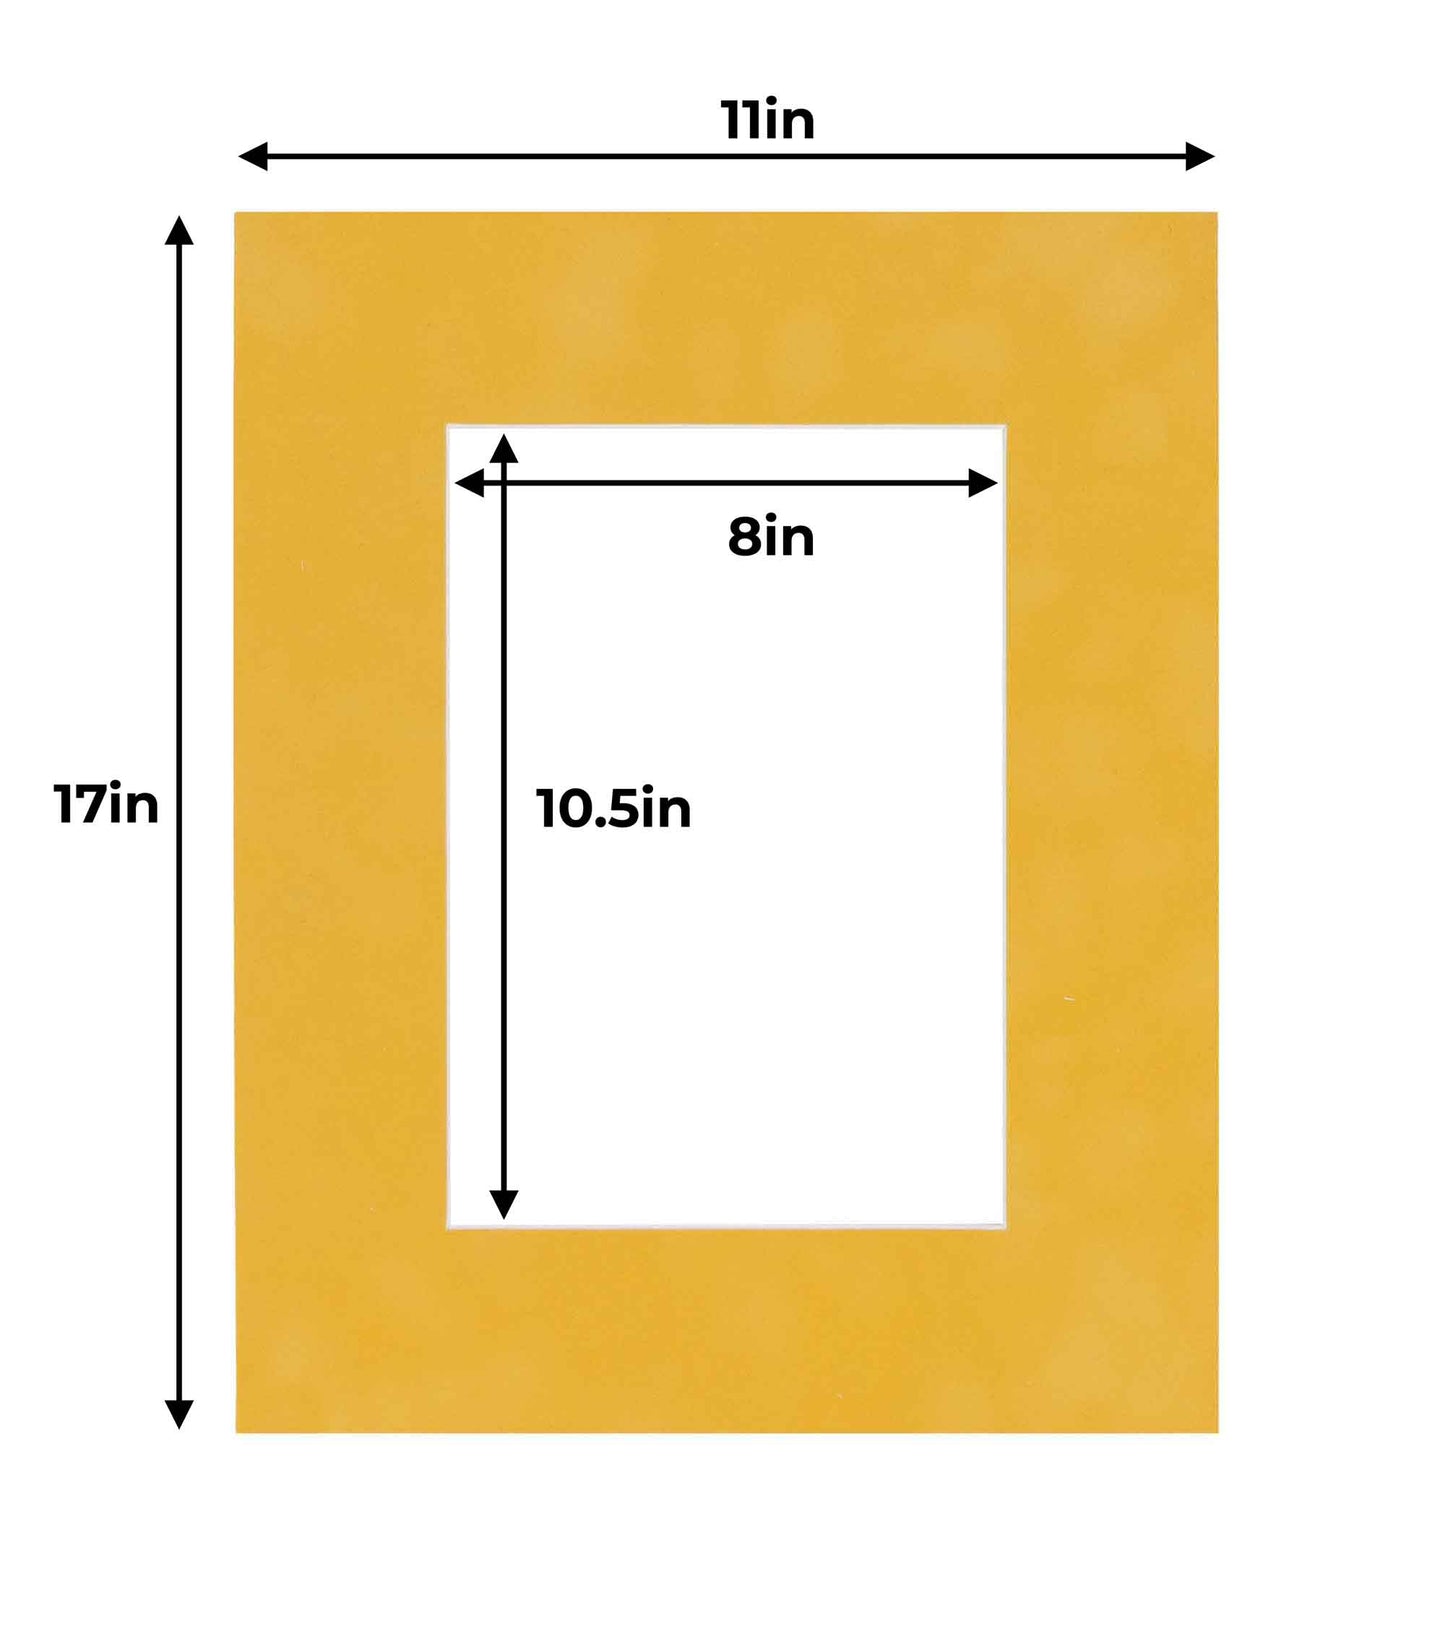 Sunrise Yellow Suede Precut Acid-Free Matboard Set with Clear Bag & Backing